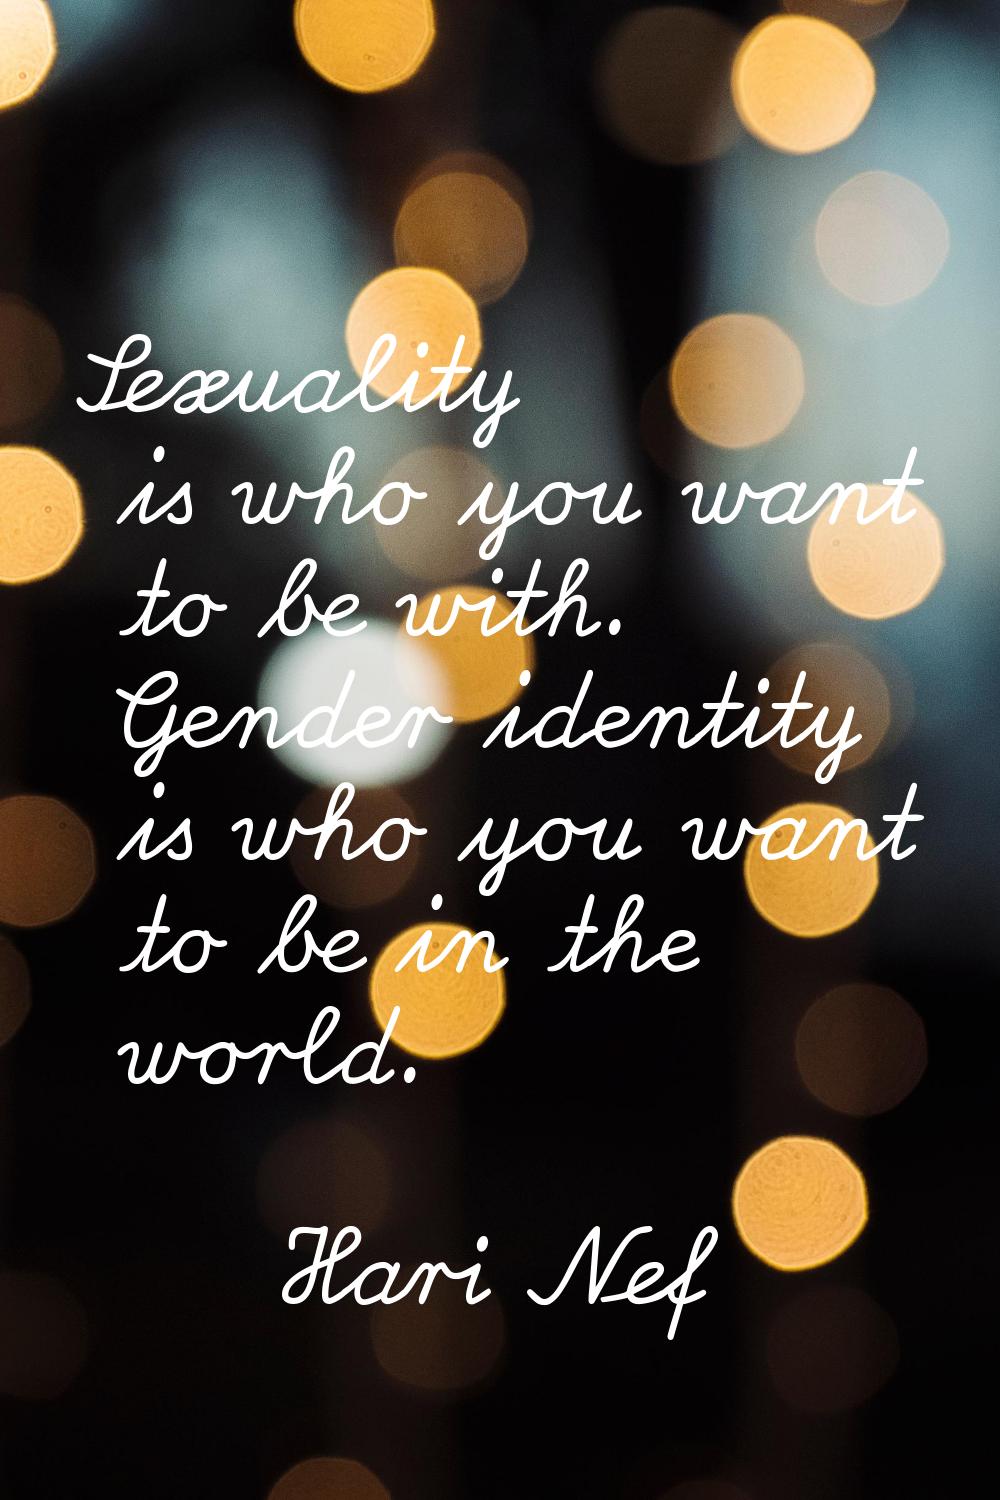 Sexuality is who you want to be with. Gender identity is who you want to be in the world.